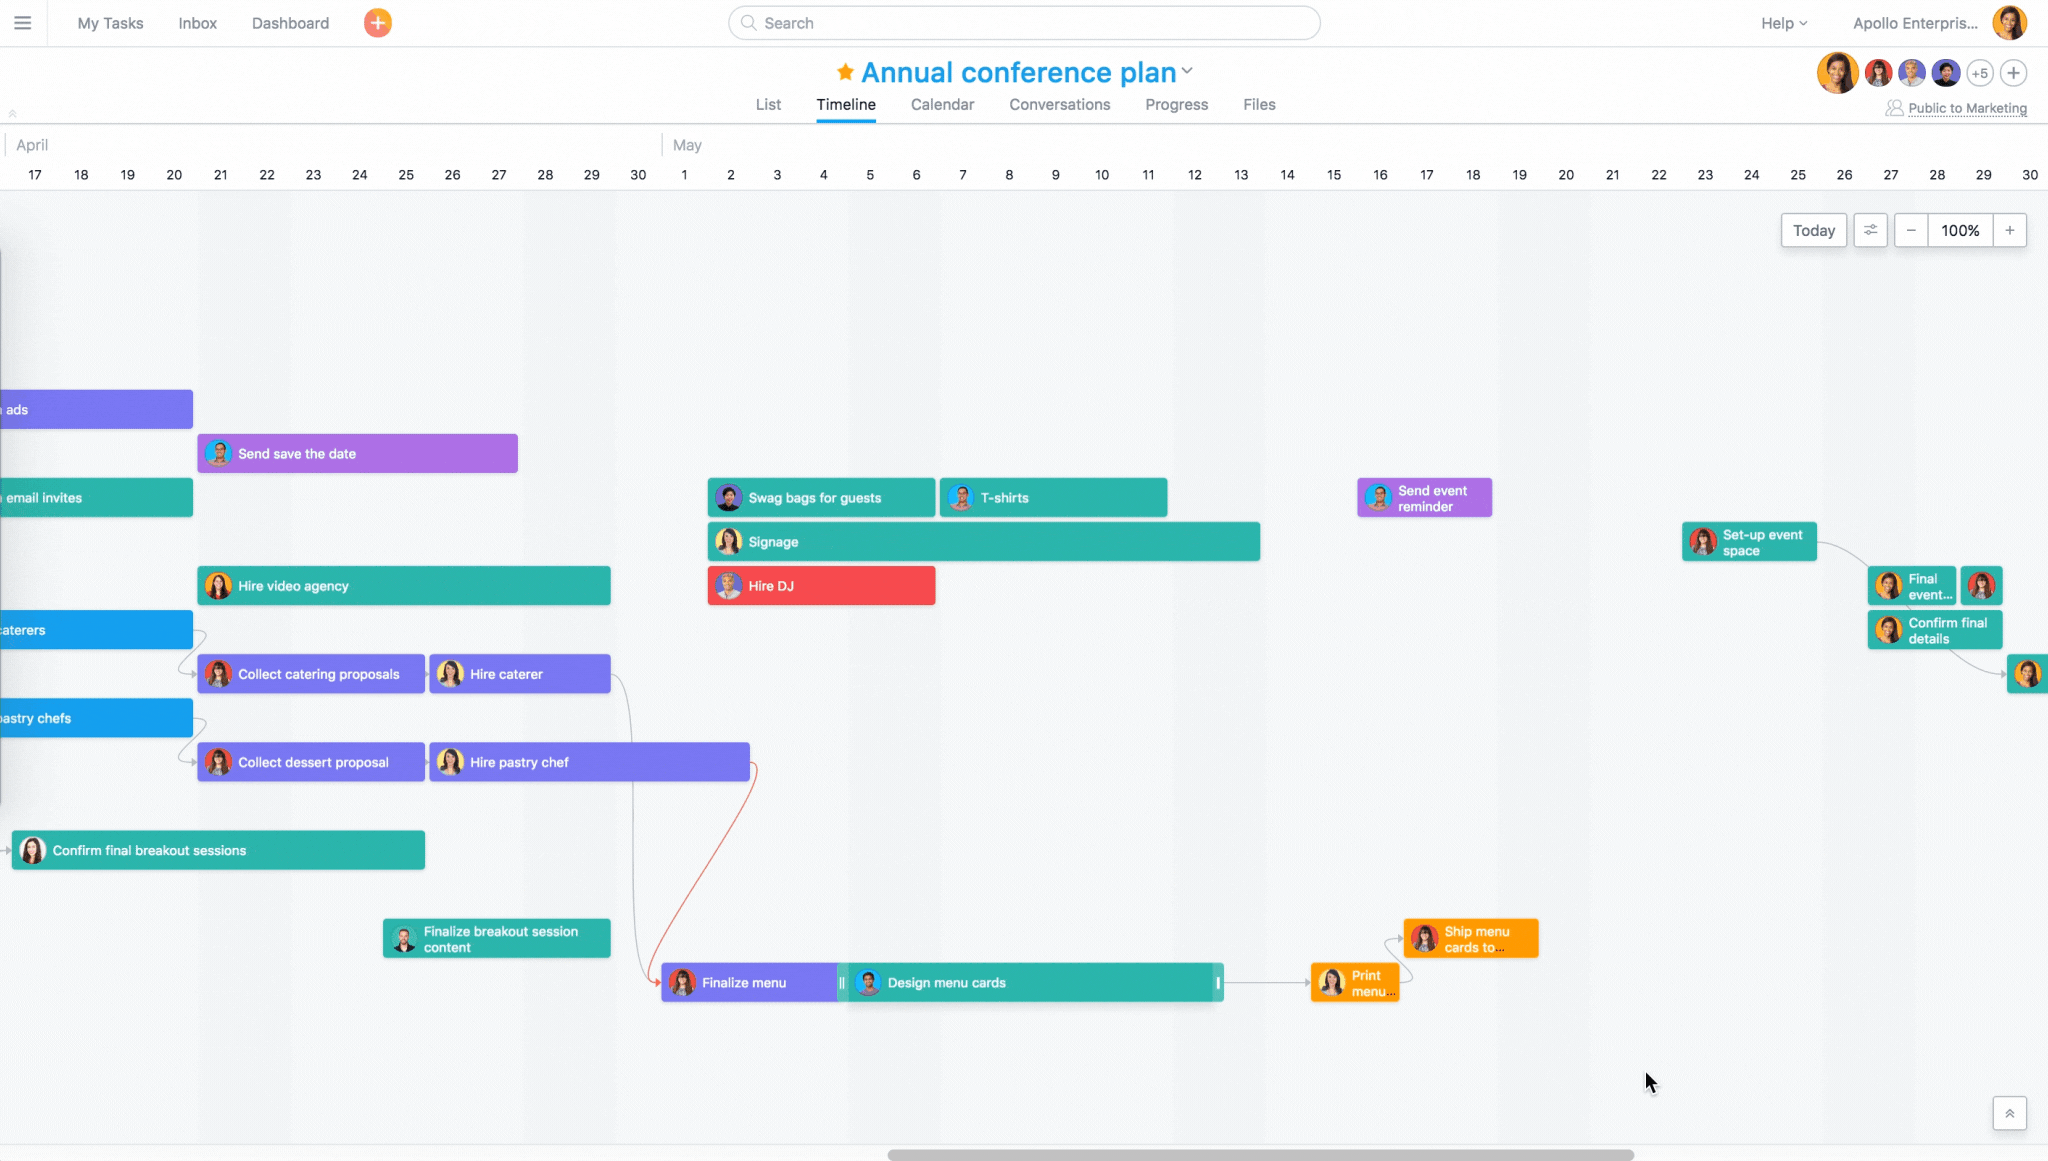 How to multi-select and move tasks in Asana timeline